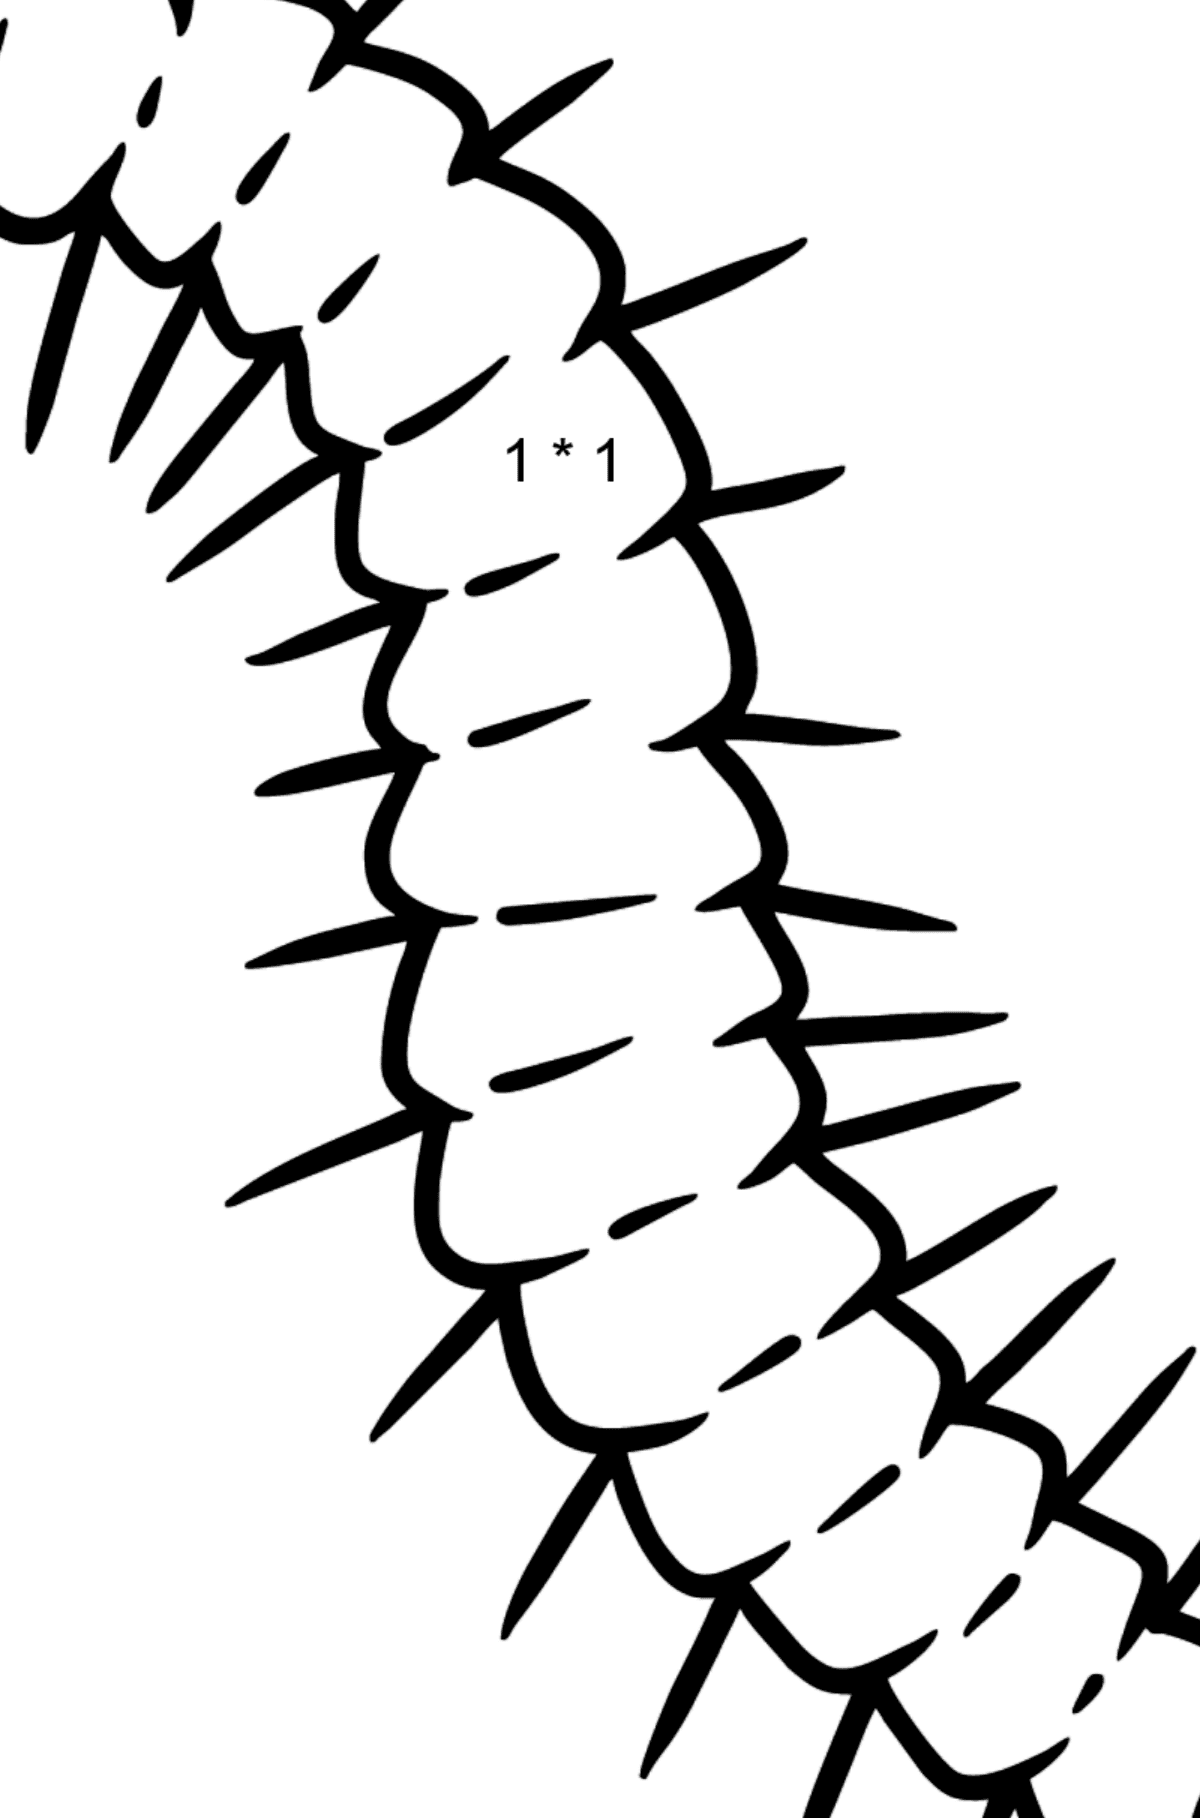 Centipede coloring page - Math Coloring - Multiplication for Kids